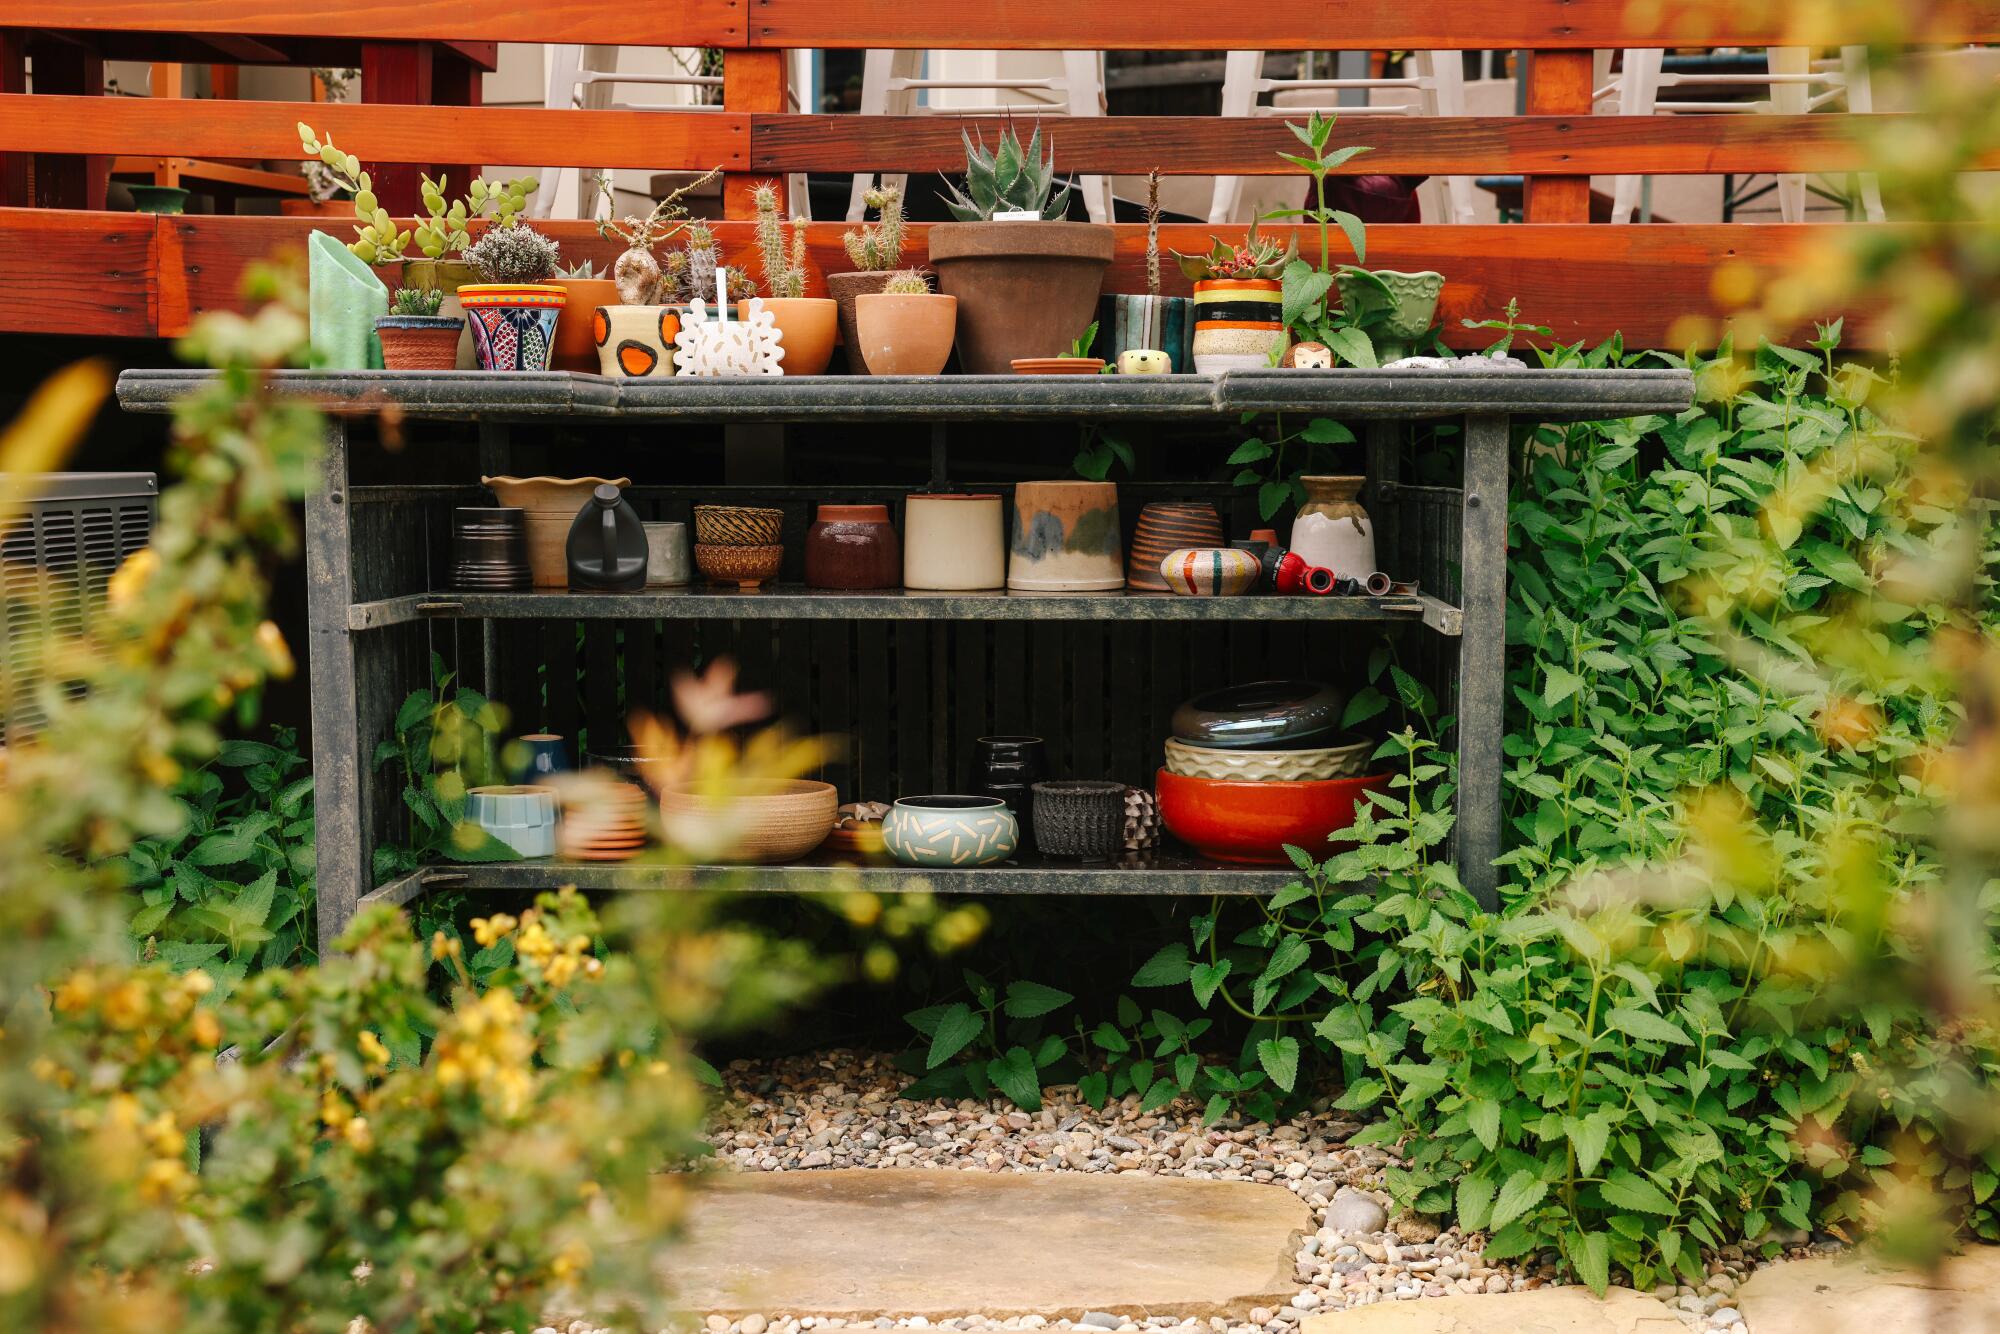 A potting bench filled with pots and surrounded by plants growing at its base